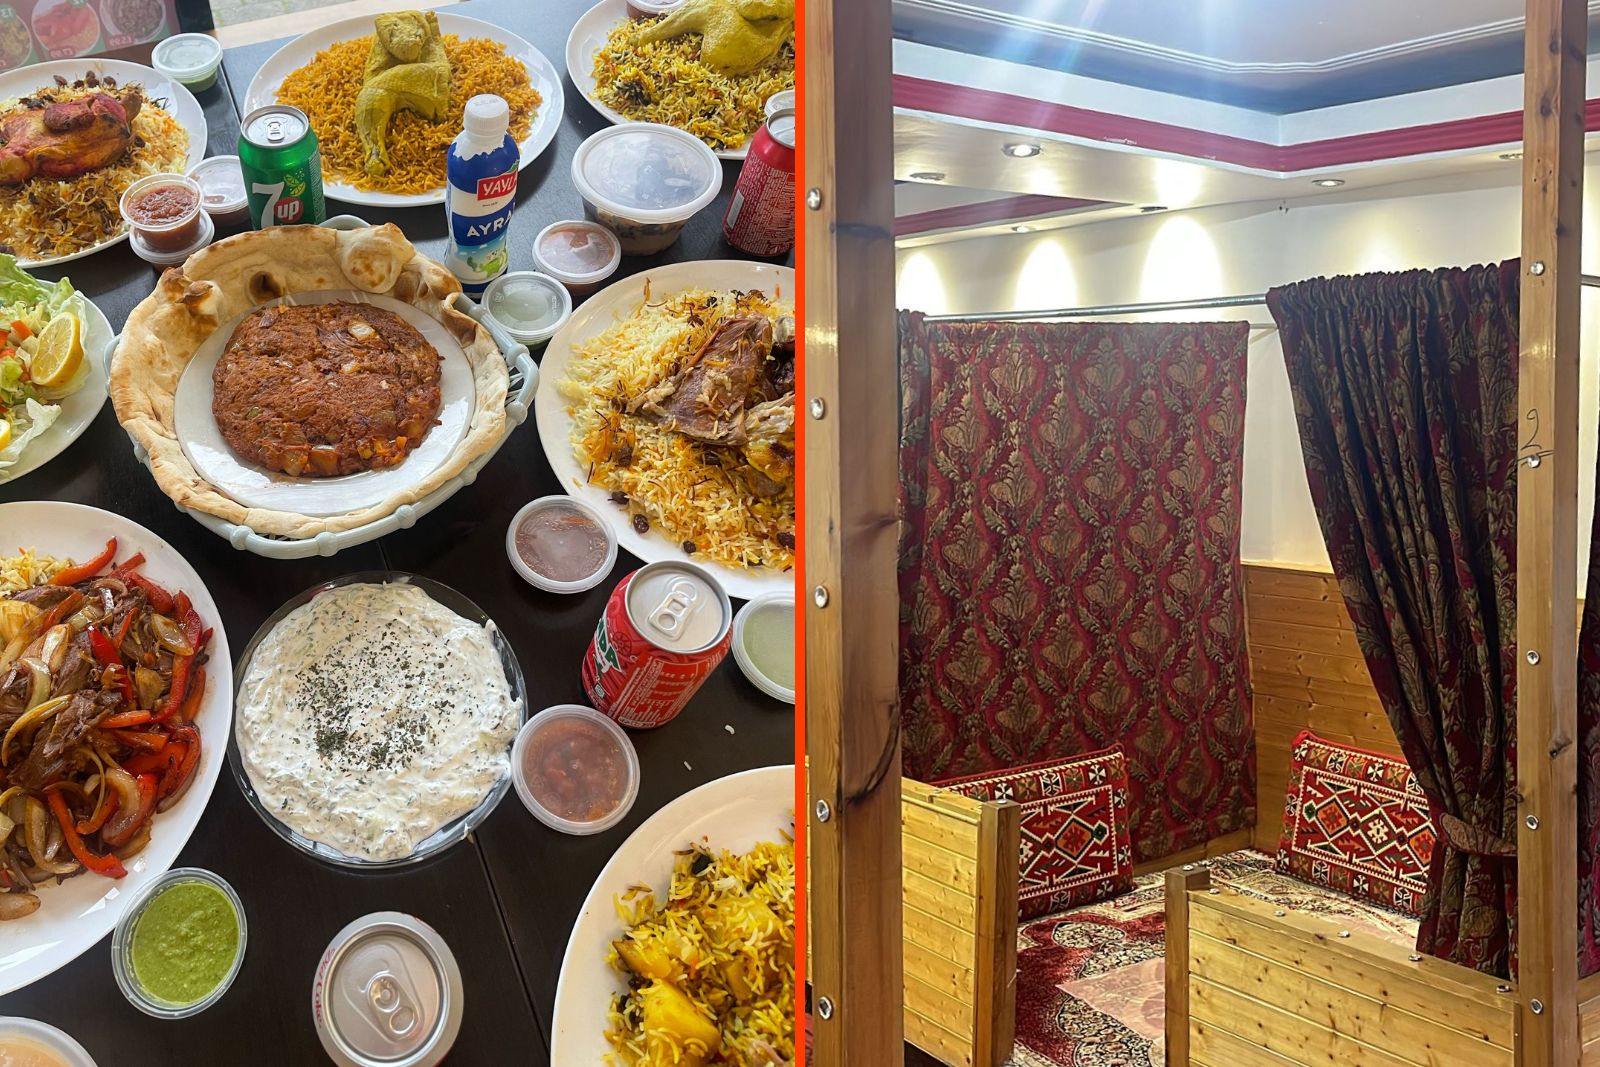 A composite of two images: on the left, an assortment of rice, meat and mezze dishes and sauces on a table. On the right, a photo of the restaurant interior with floor seating on traditional middle eastern carpets and cushions for diners.